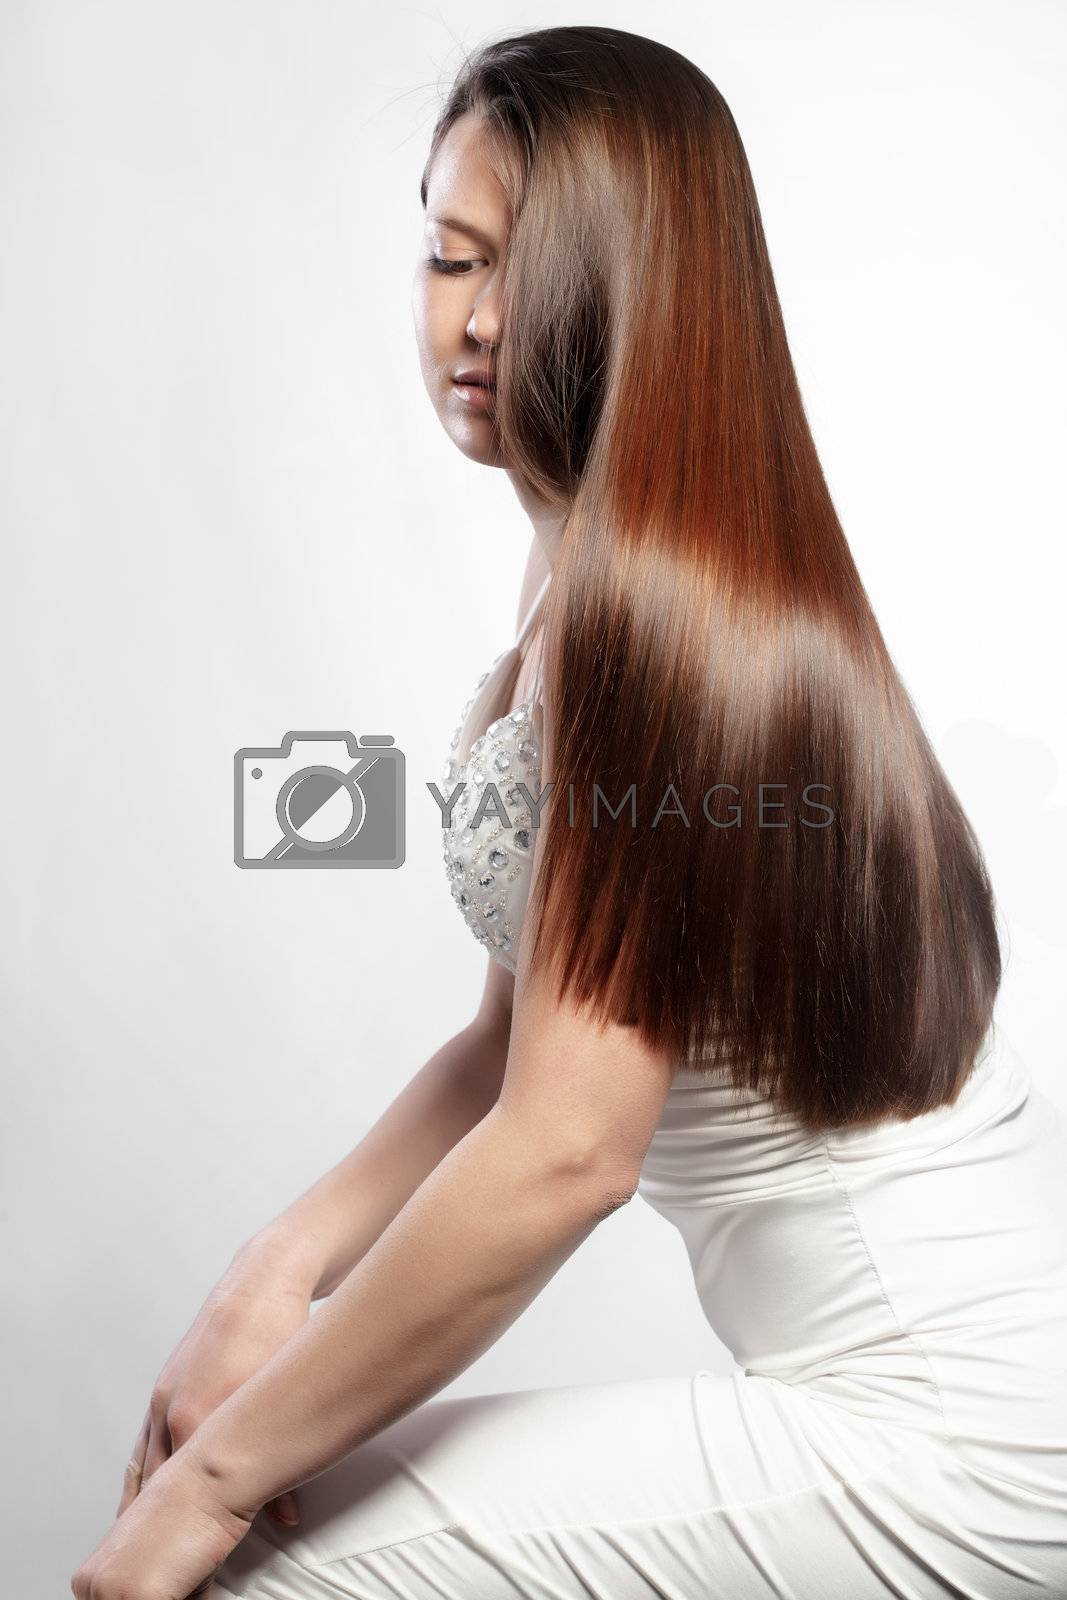 Royalty free image of Perfect hair by alenkasm